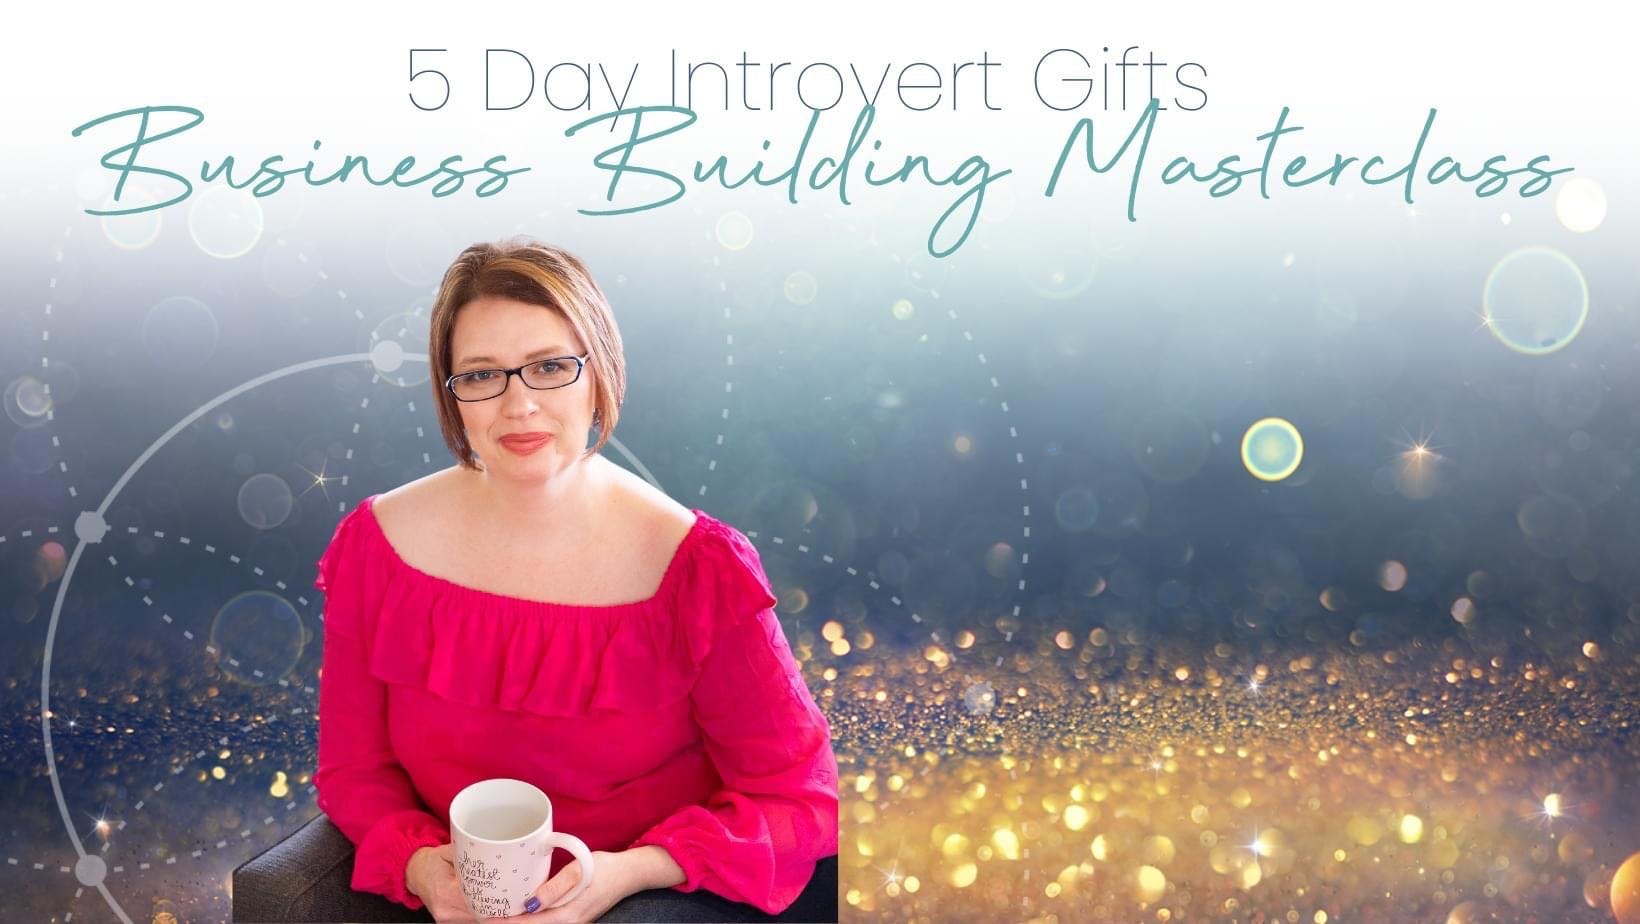 5 Day Introvert Gift Business Building Masterclass